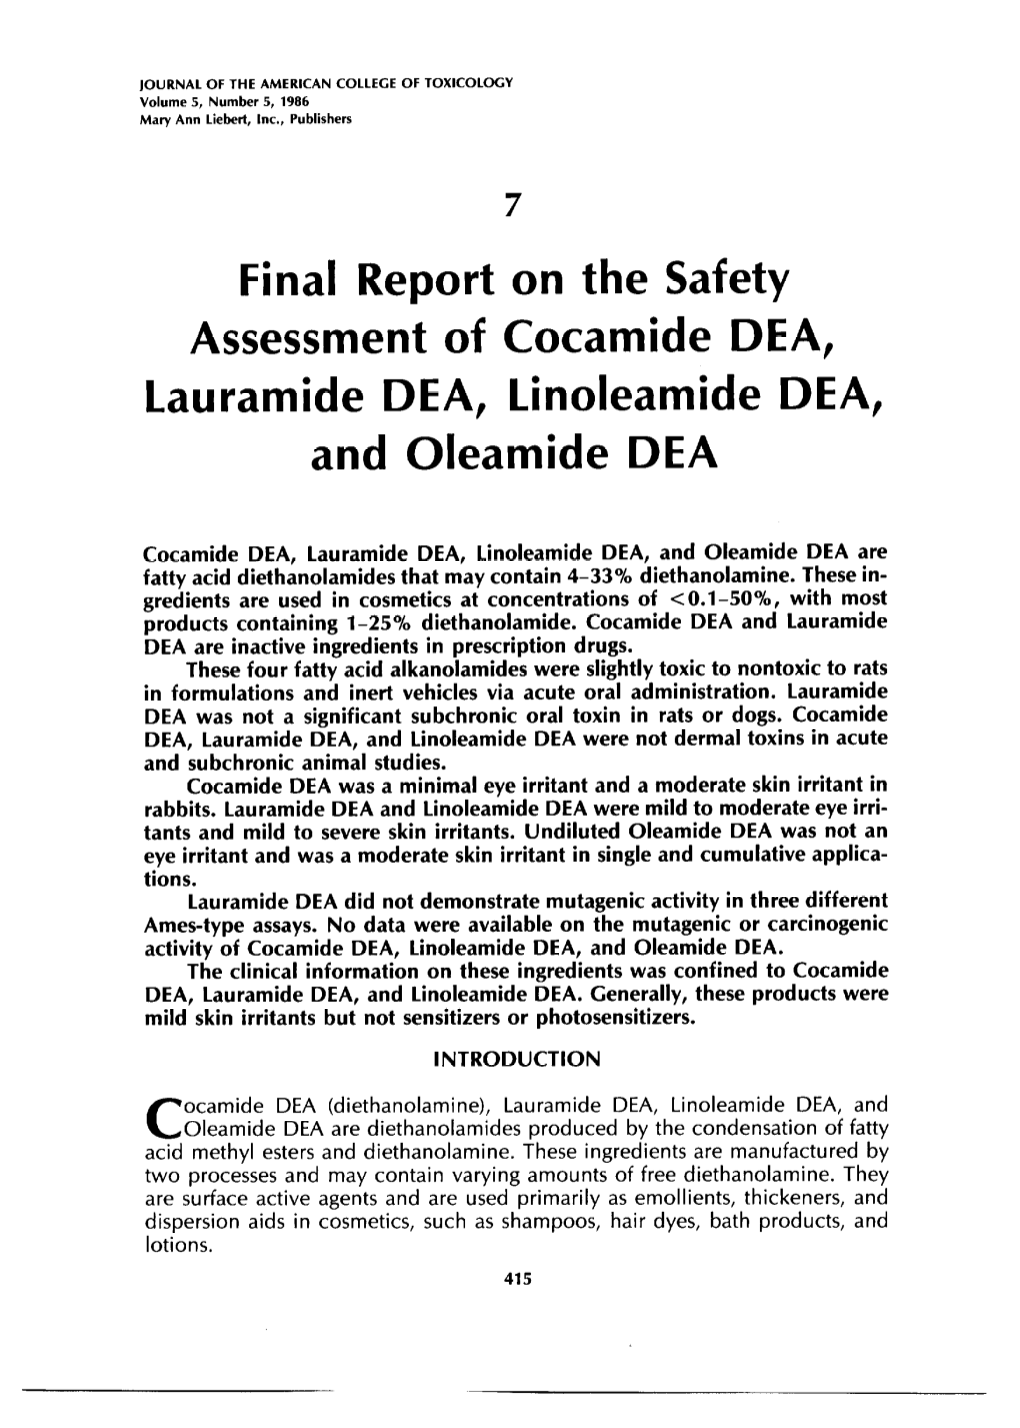 Final Report on the Safety Assessment of Cocamide DEA, Lauramide DEA, Linoleamide DEA, and Oleamide DEA